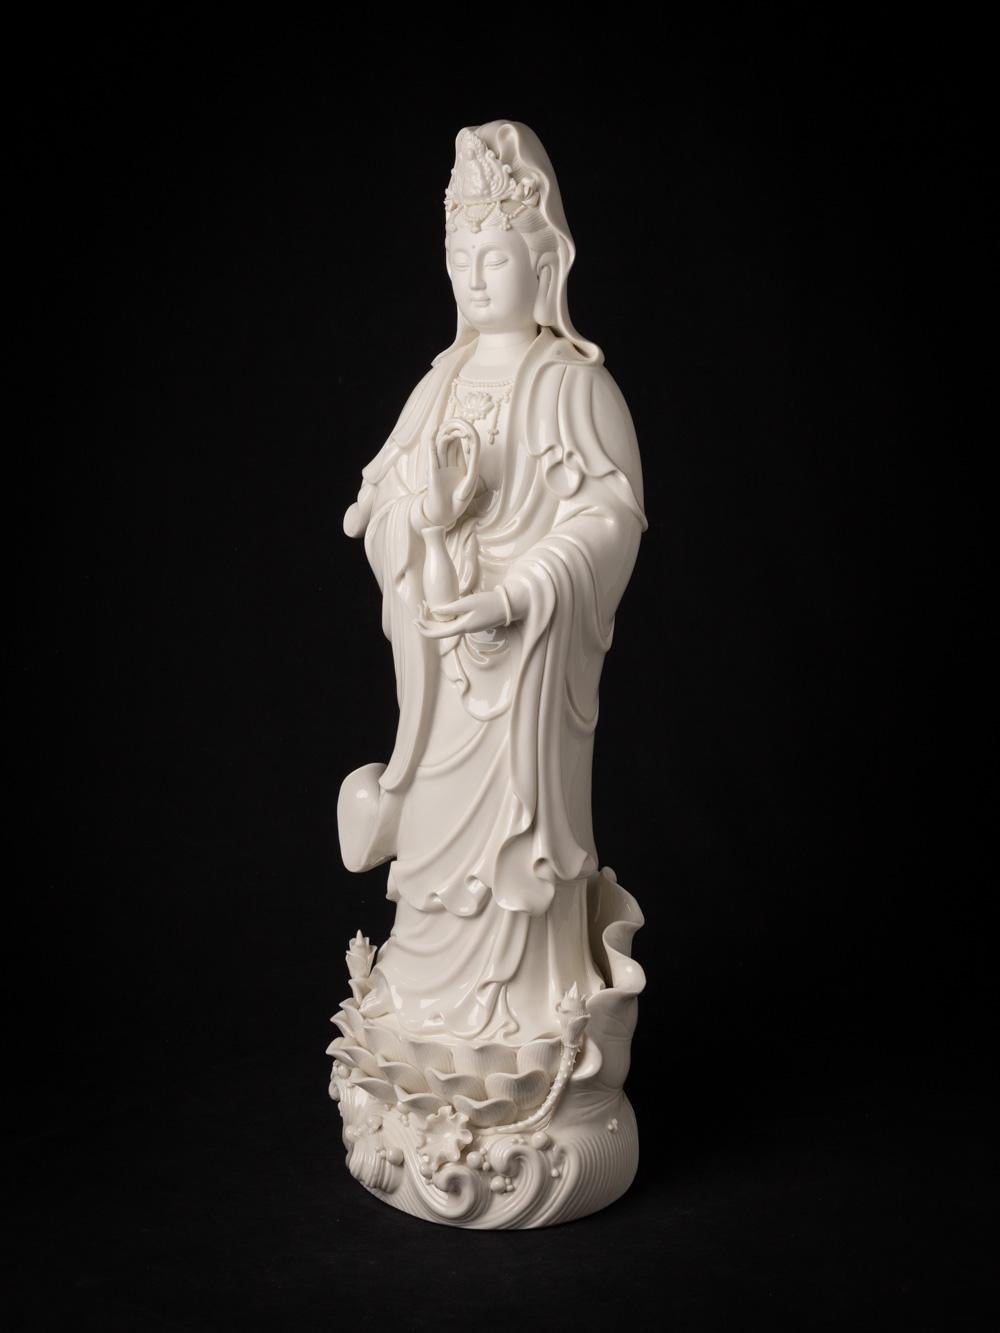 The very beautiful and detailed porcelain Guan Yin statue is an exquisite work of art that originates from China. Crafted from the finest quality Dehua porcelain, this statue stands at an elegant height of 65.5 cm and measures 22.5 cm in width and